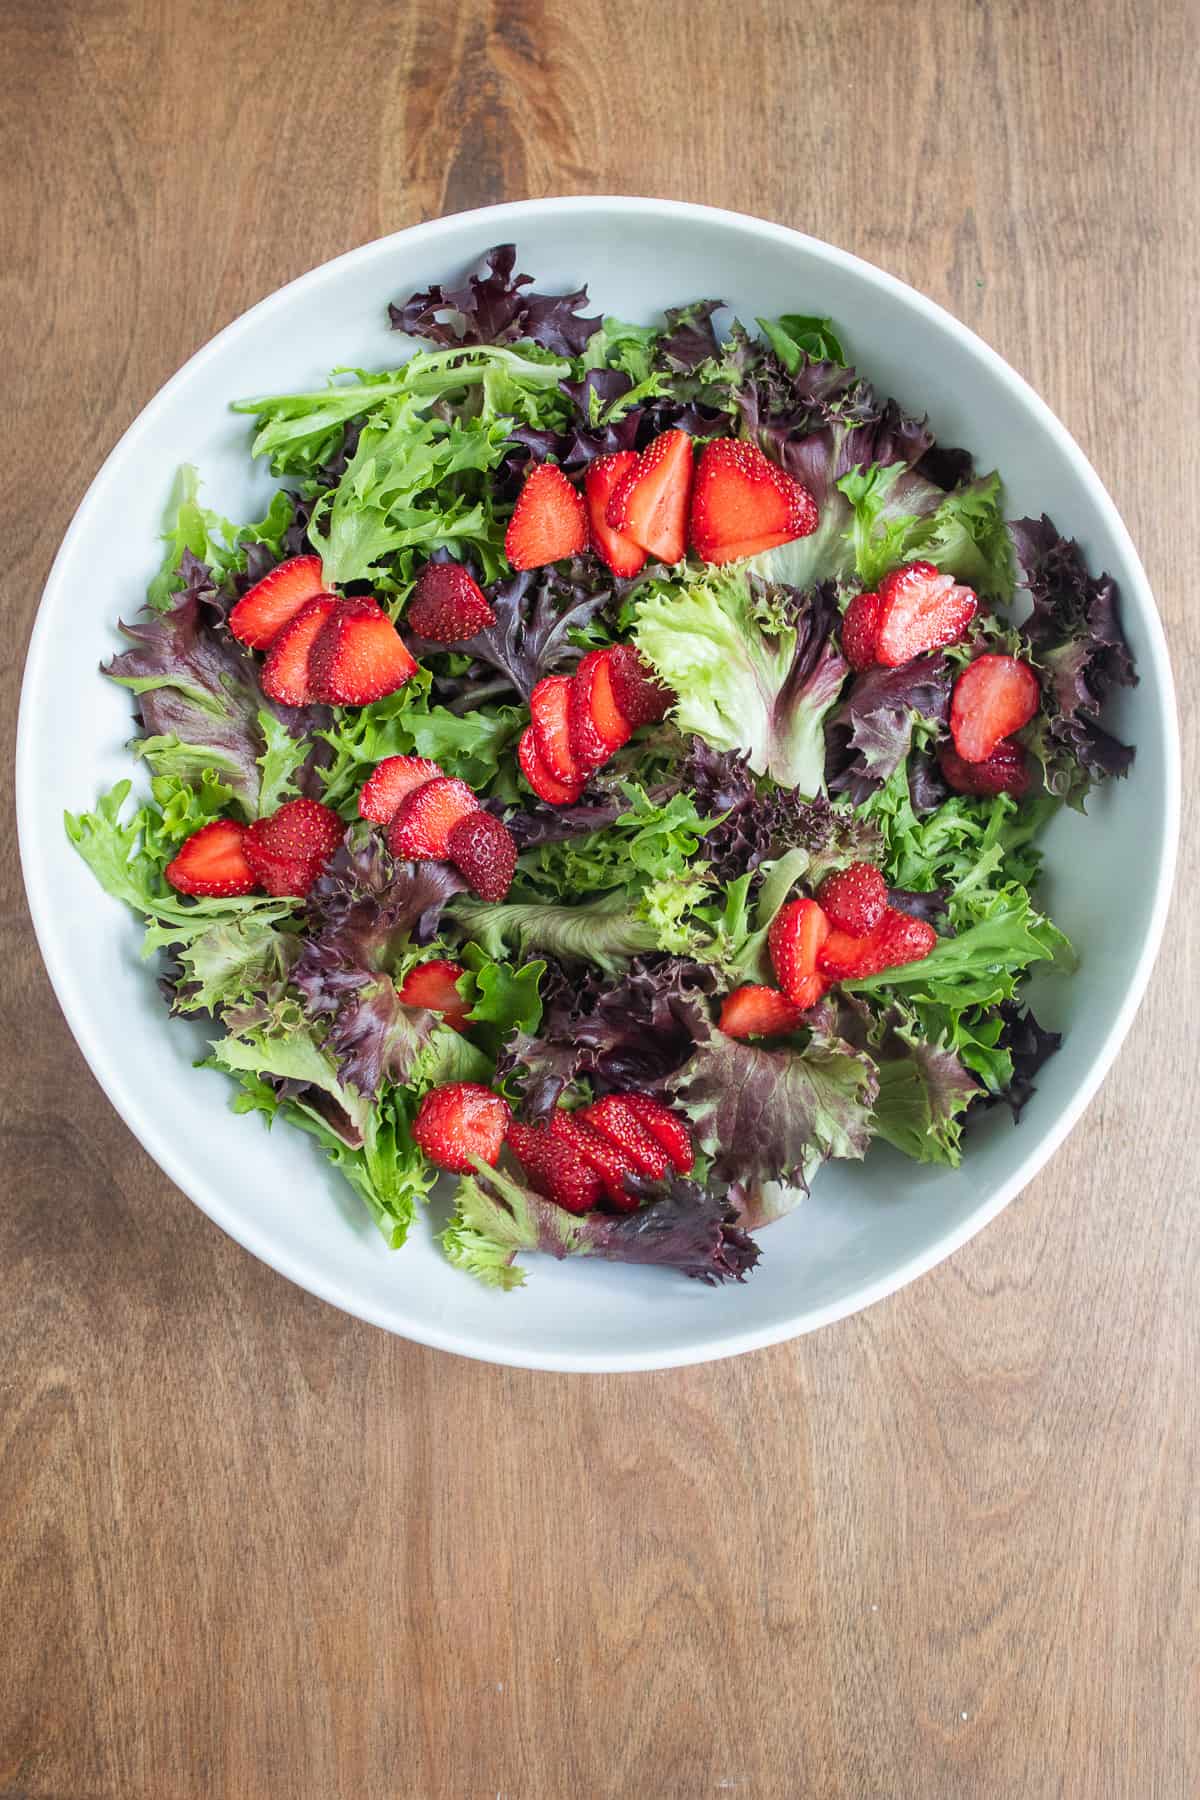 Fresh strawberries are scattered over a bed of mixed greens.